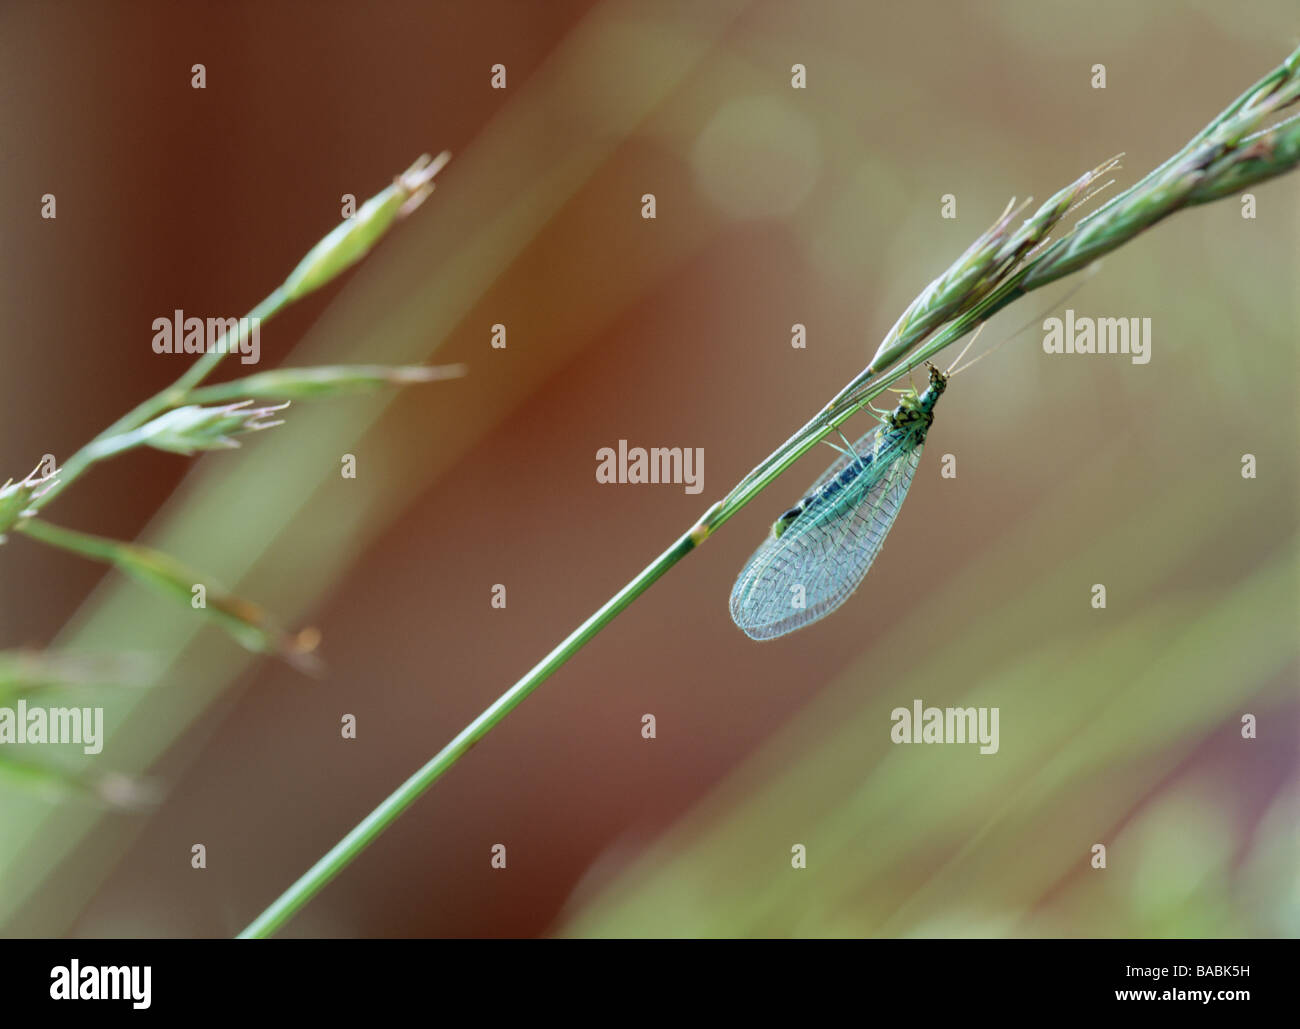 Insect on stem close-up Stock Photo